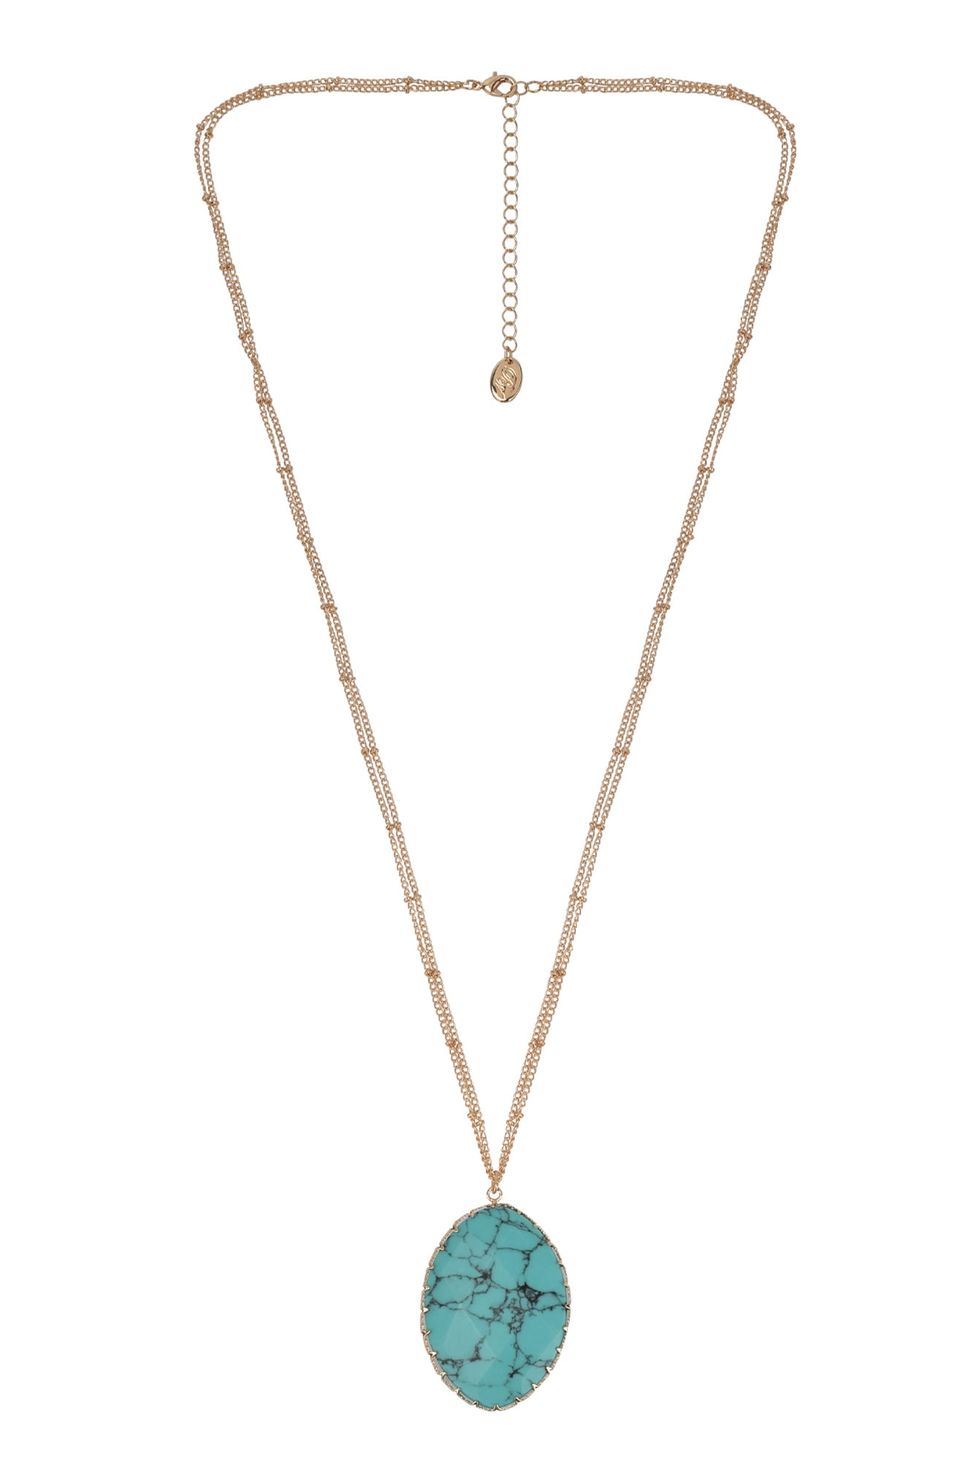 The Pioneer Woman Turquoise Stone and Gold Pendant Necklace